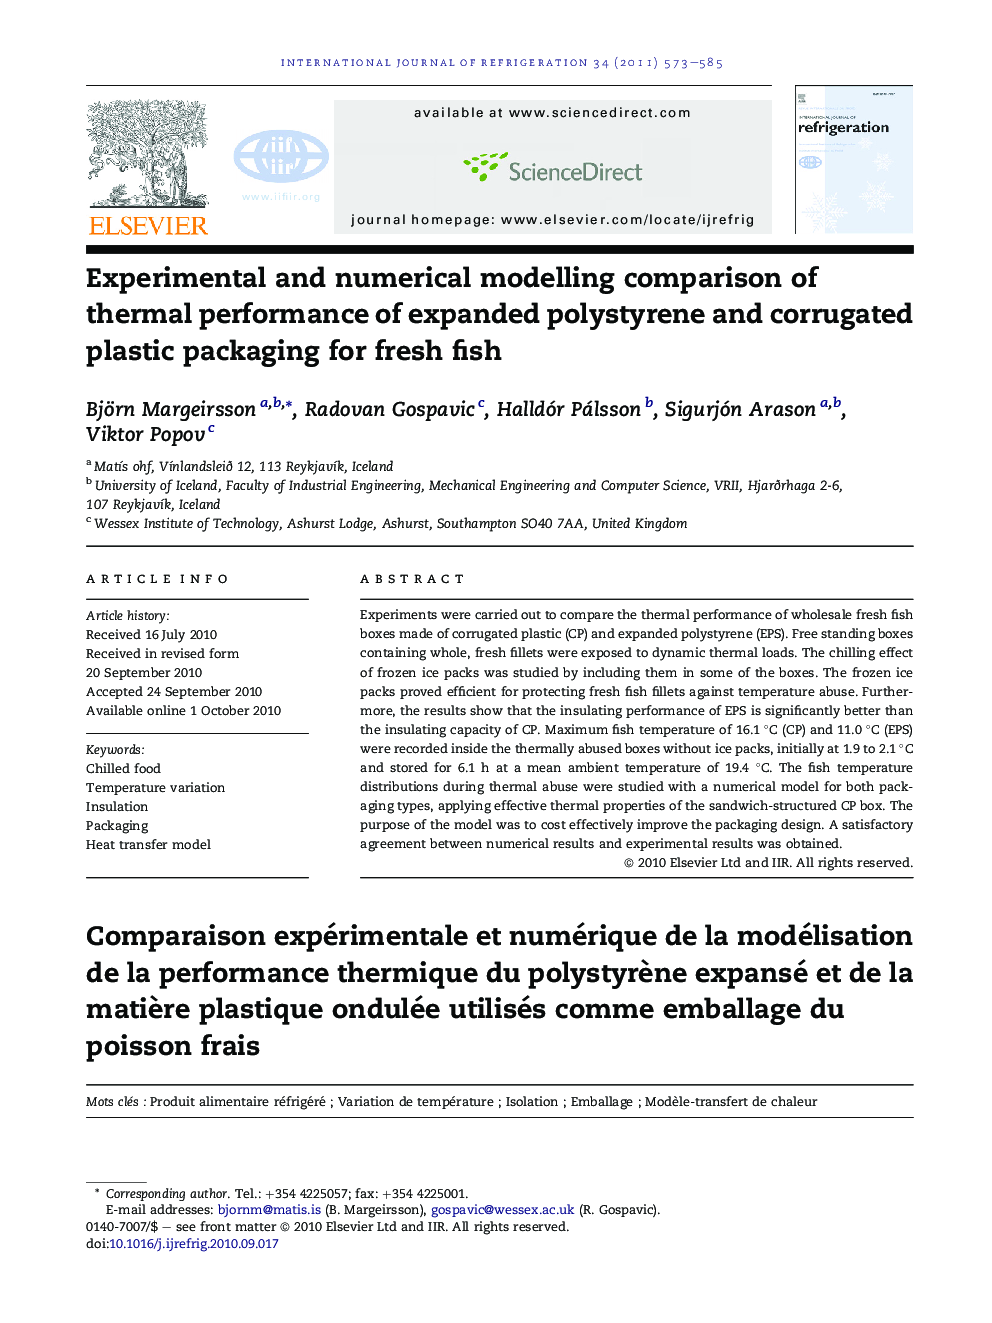 Experimental and numerical modelling comparison of thermal performance of expanded polystyrene and corrugated plastic packaging for fresh fish